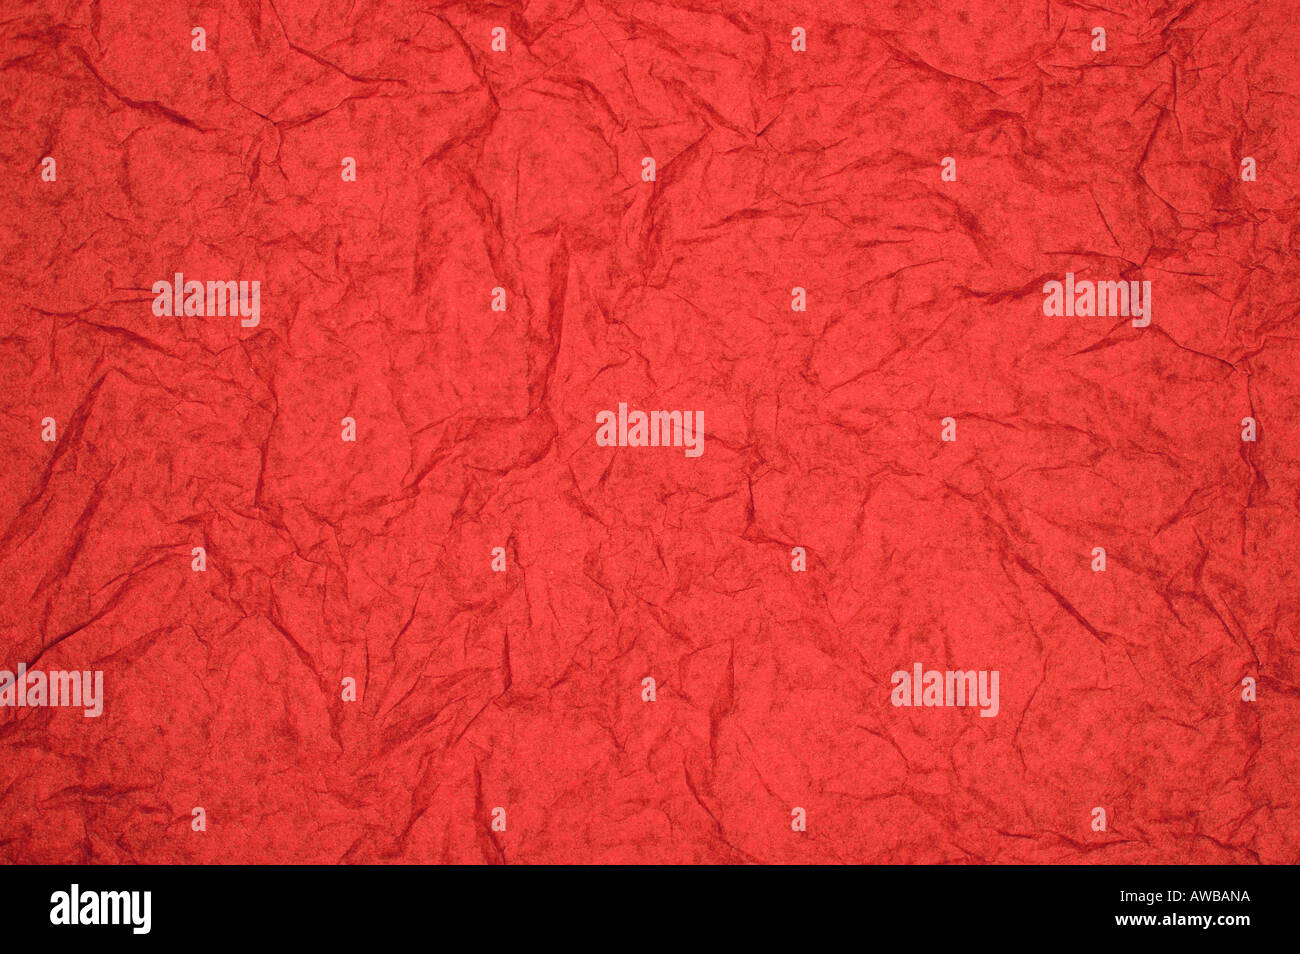 ABSTRACT RANDOM BACKGROUND OF CREASED CRUMPLED BRIGHT RED TISSUE PAPER Stock Photo